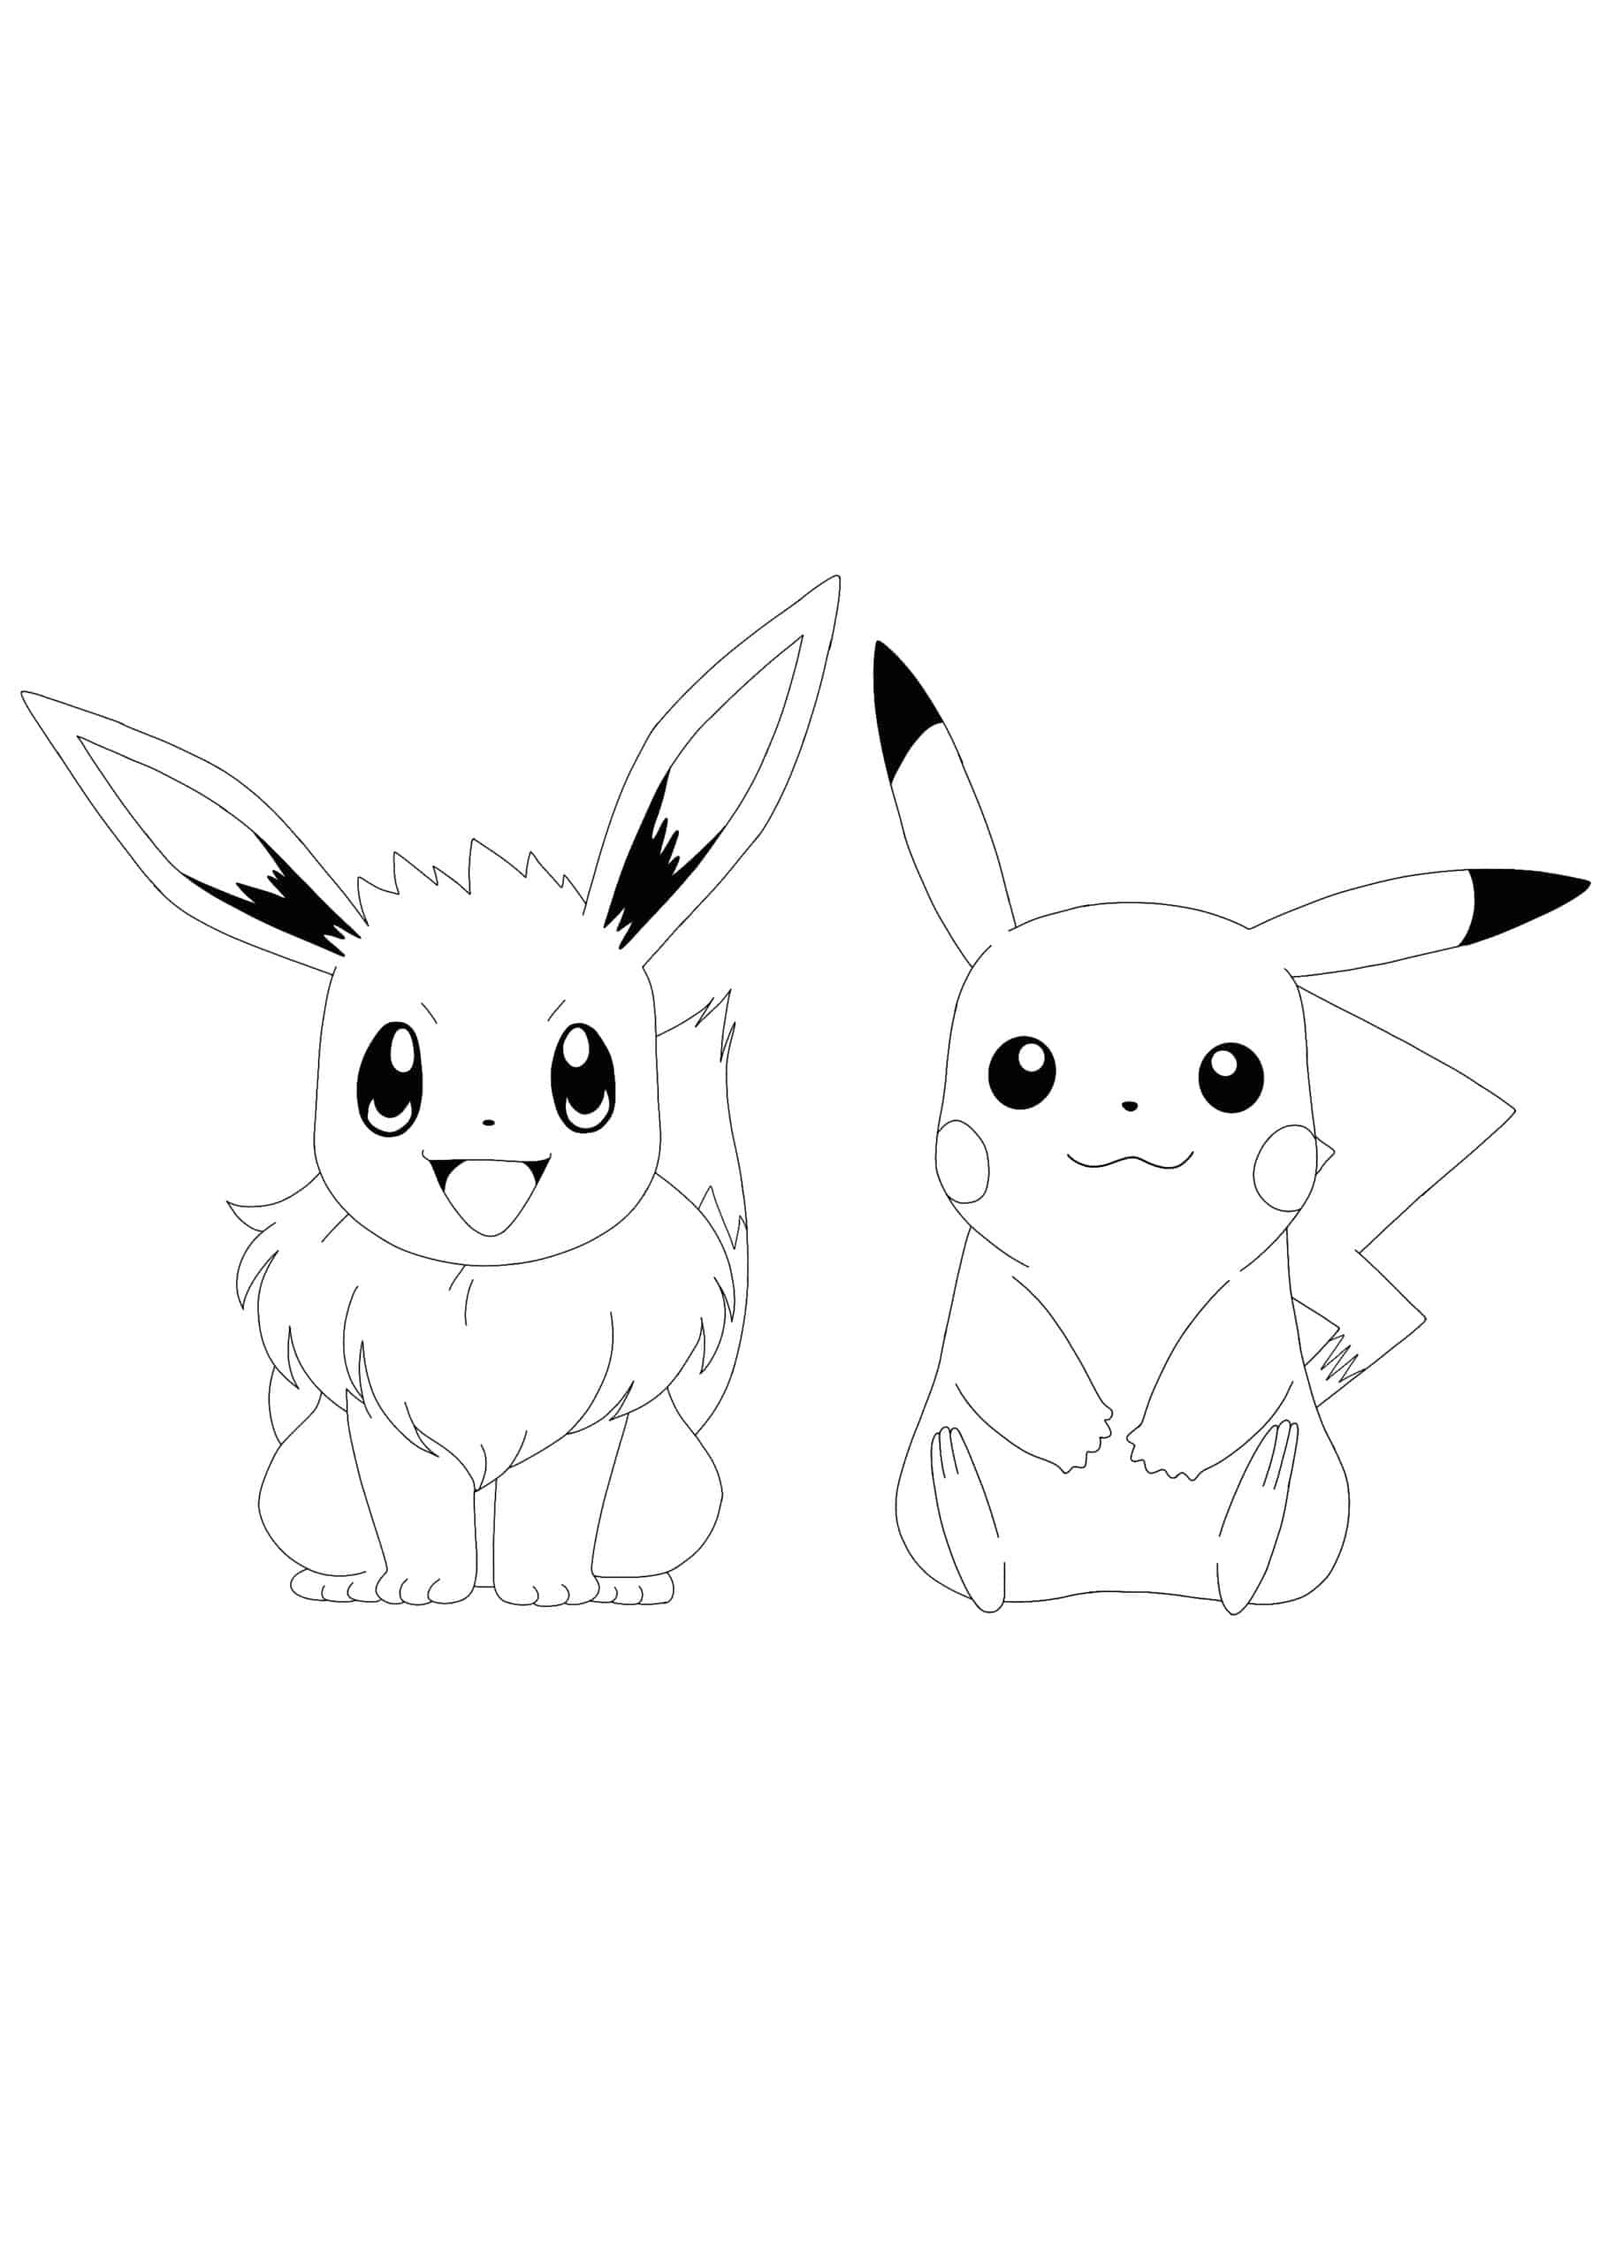 200 Eevee Coloring Pages: Evolve Your Art Skills 42